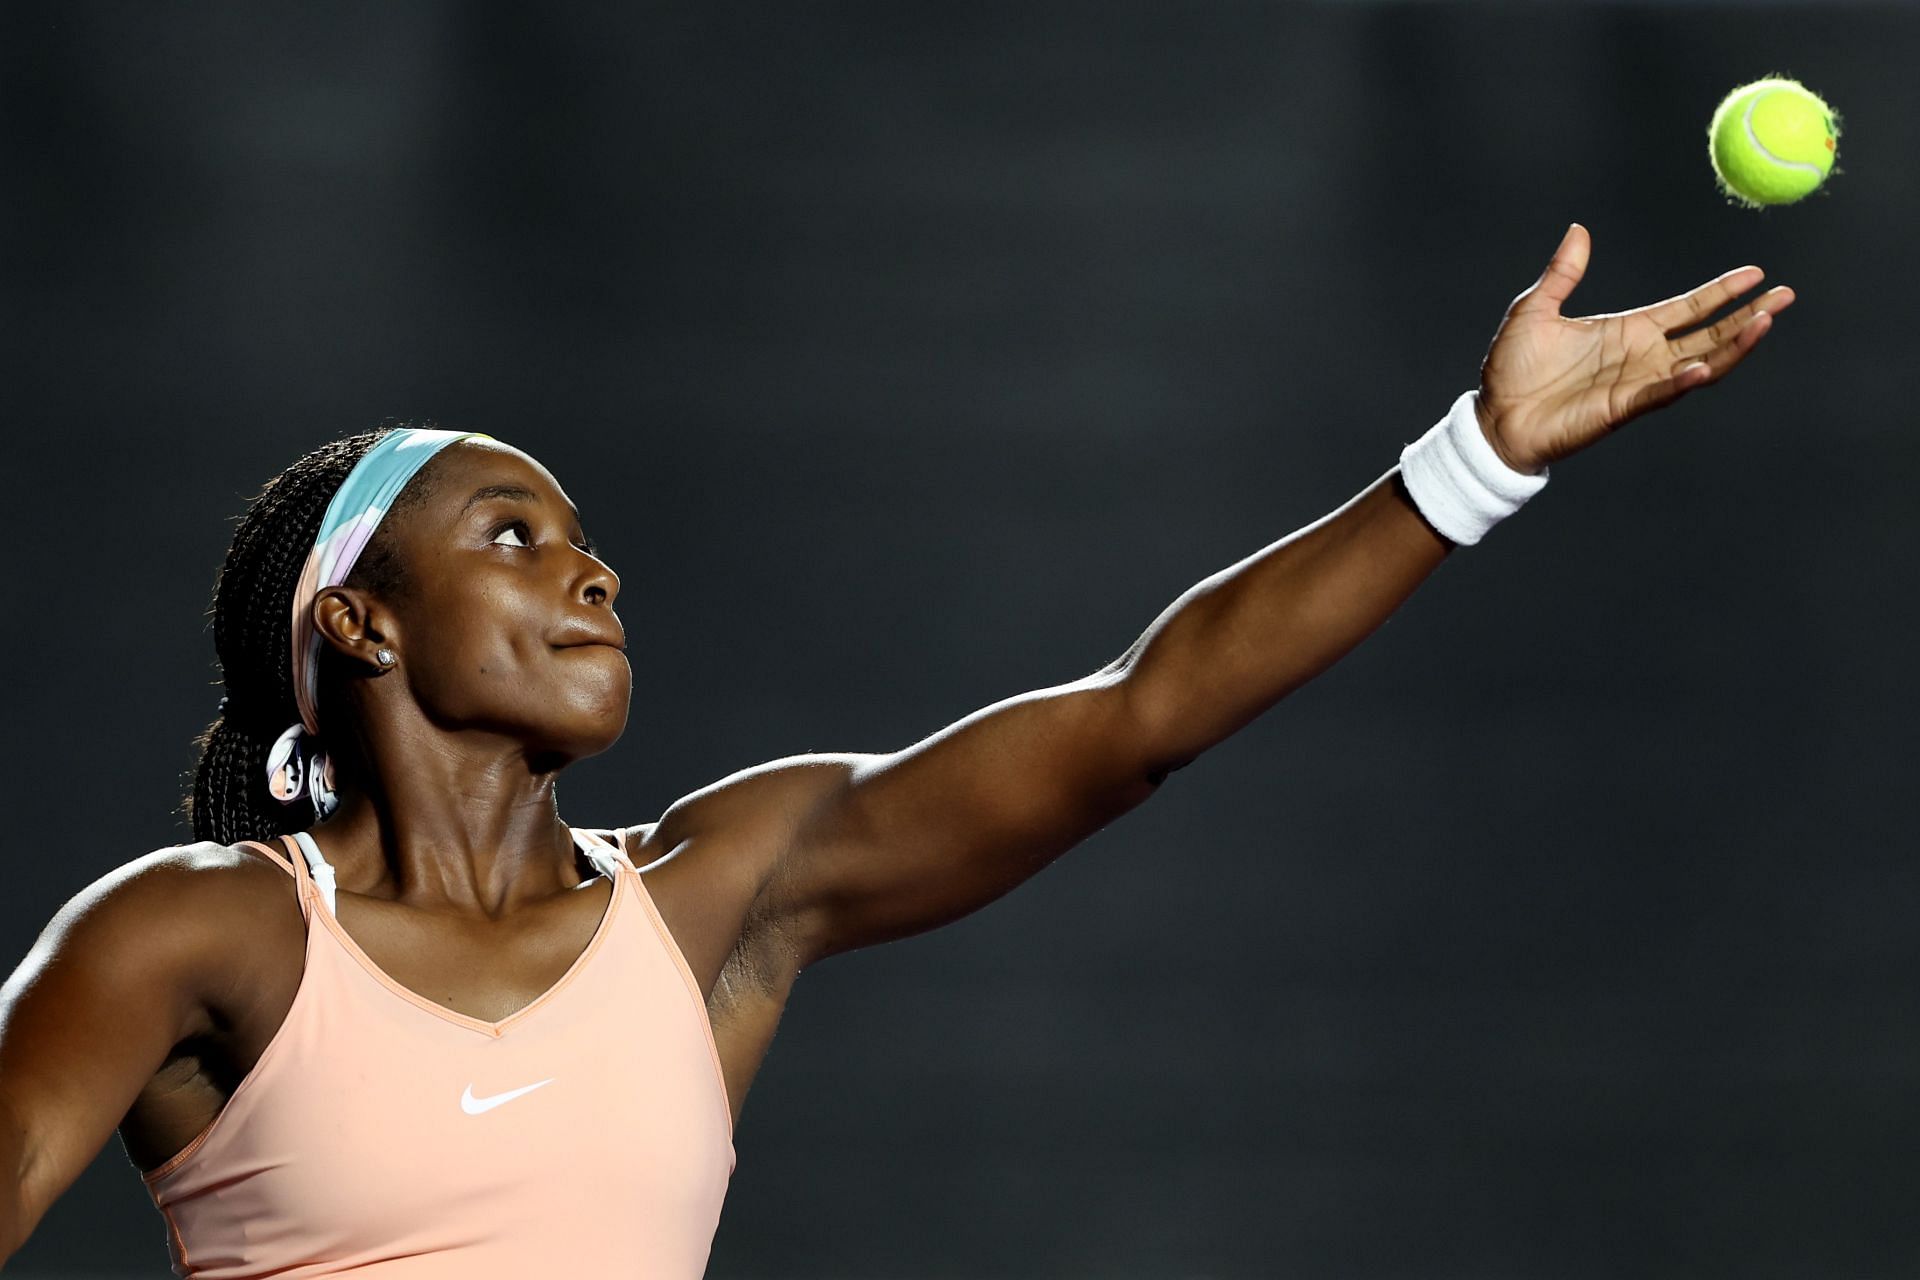 Sloane Stephens is currently ranked at No. 37